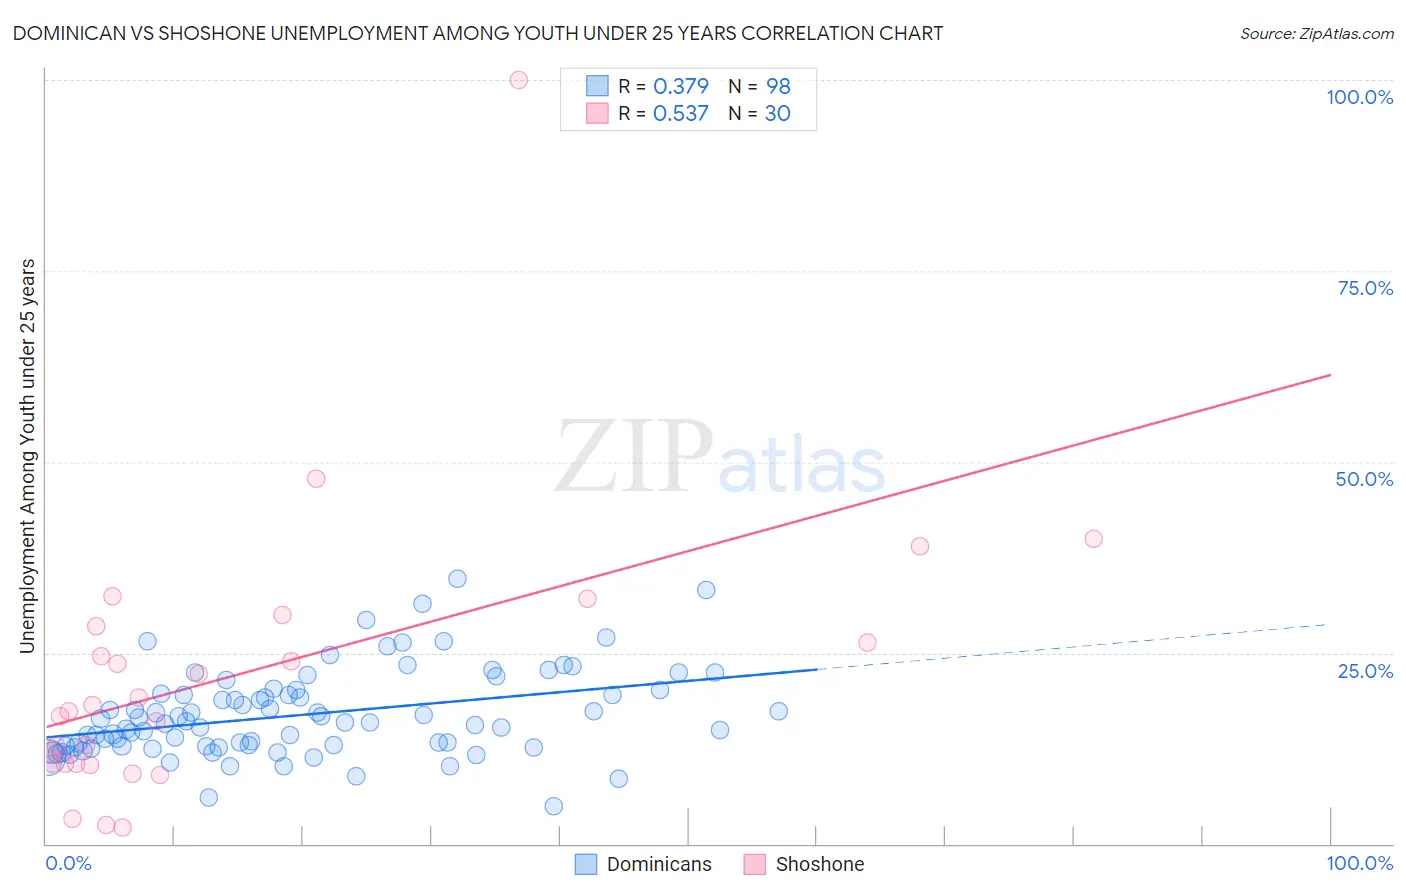 Dominican vs Shoshone Unemployment Among Youth under 25 years